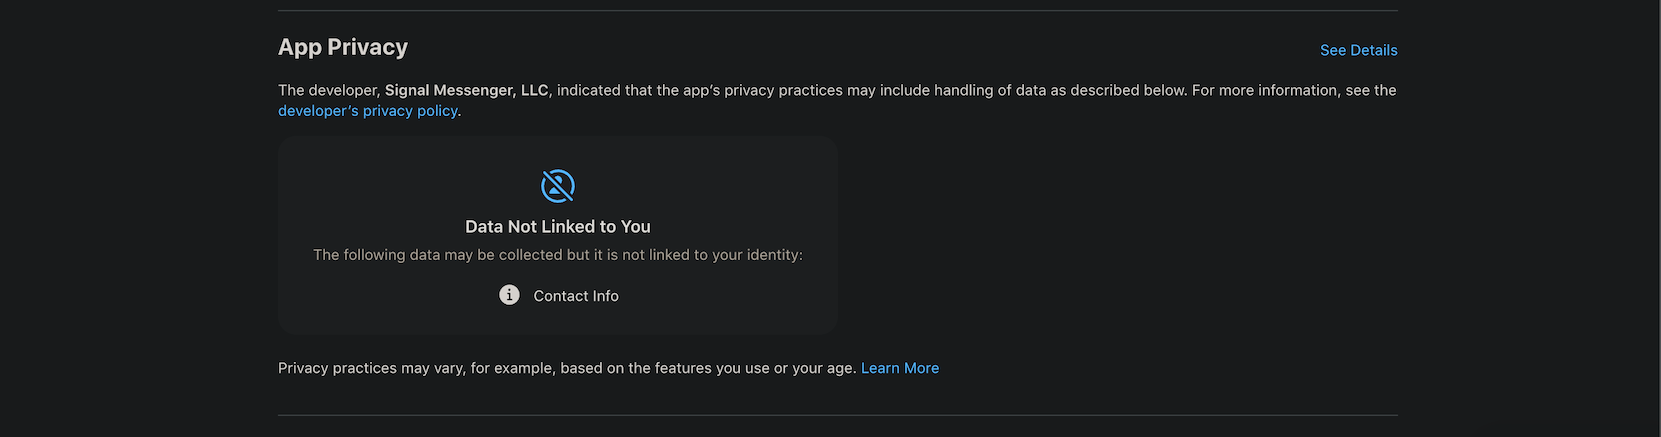 signal app privacy on Apple App Store